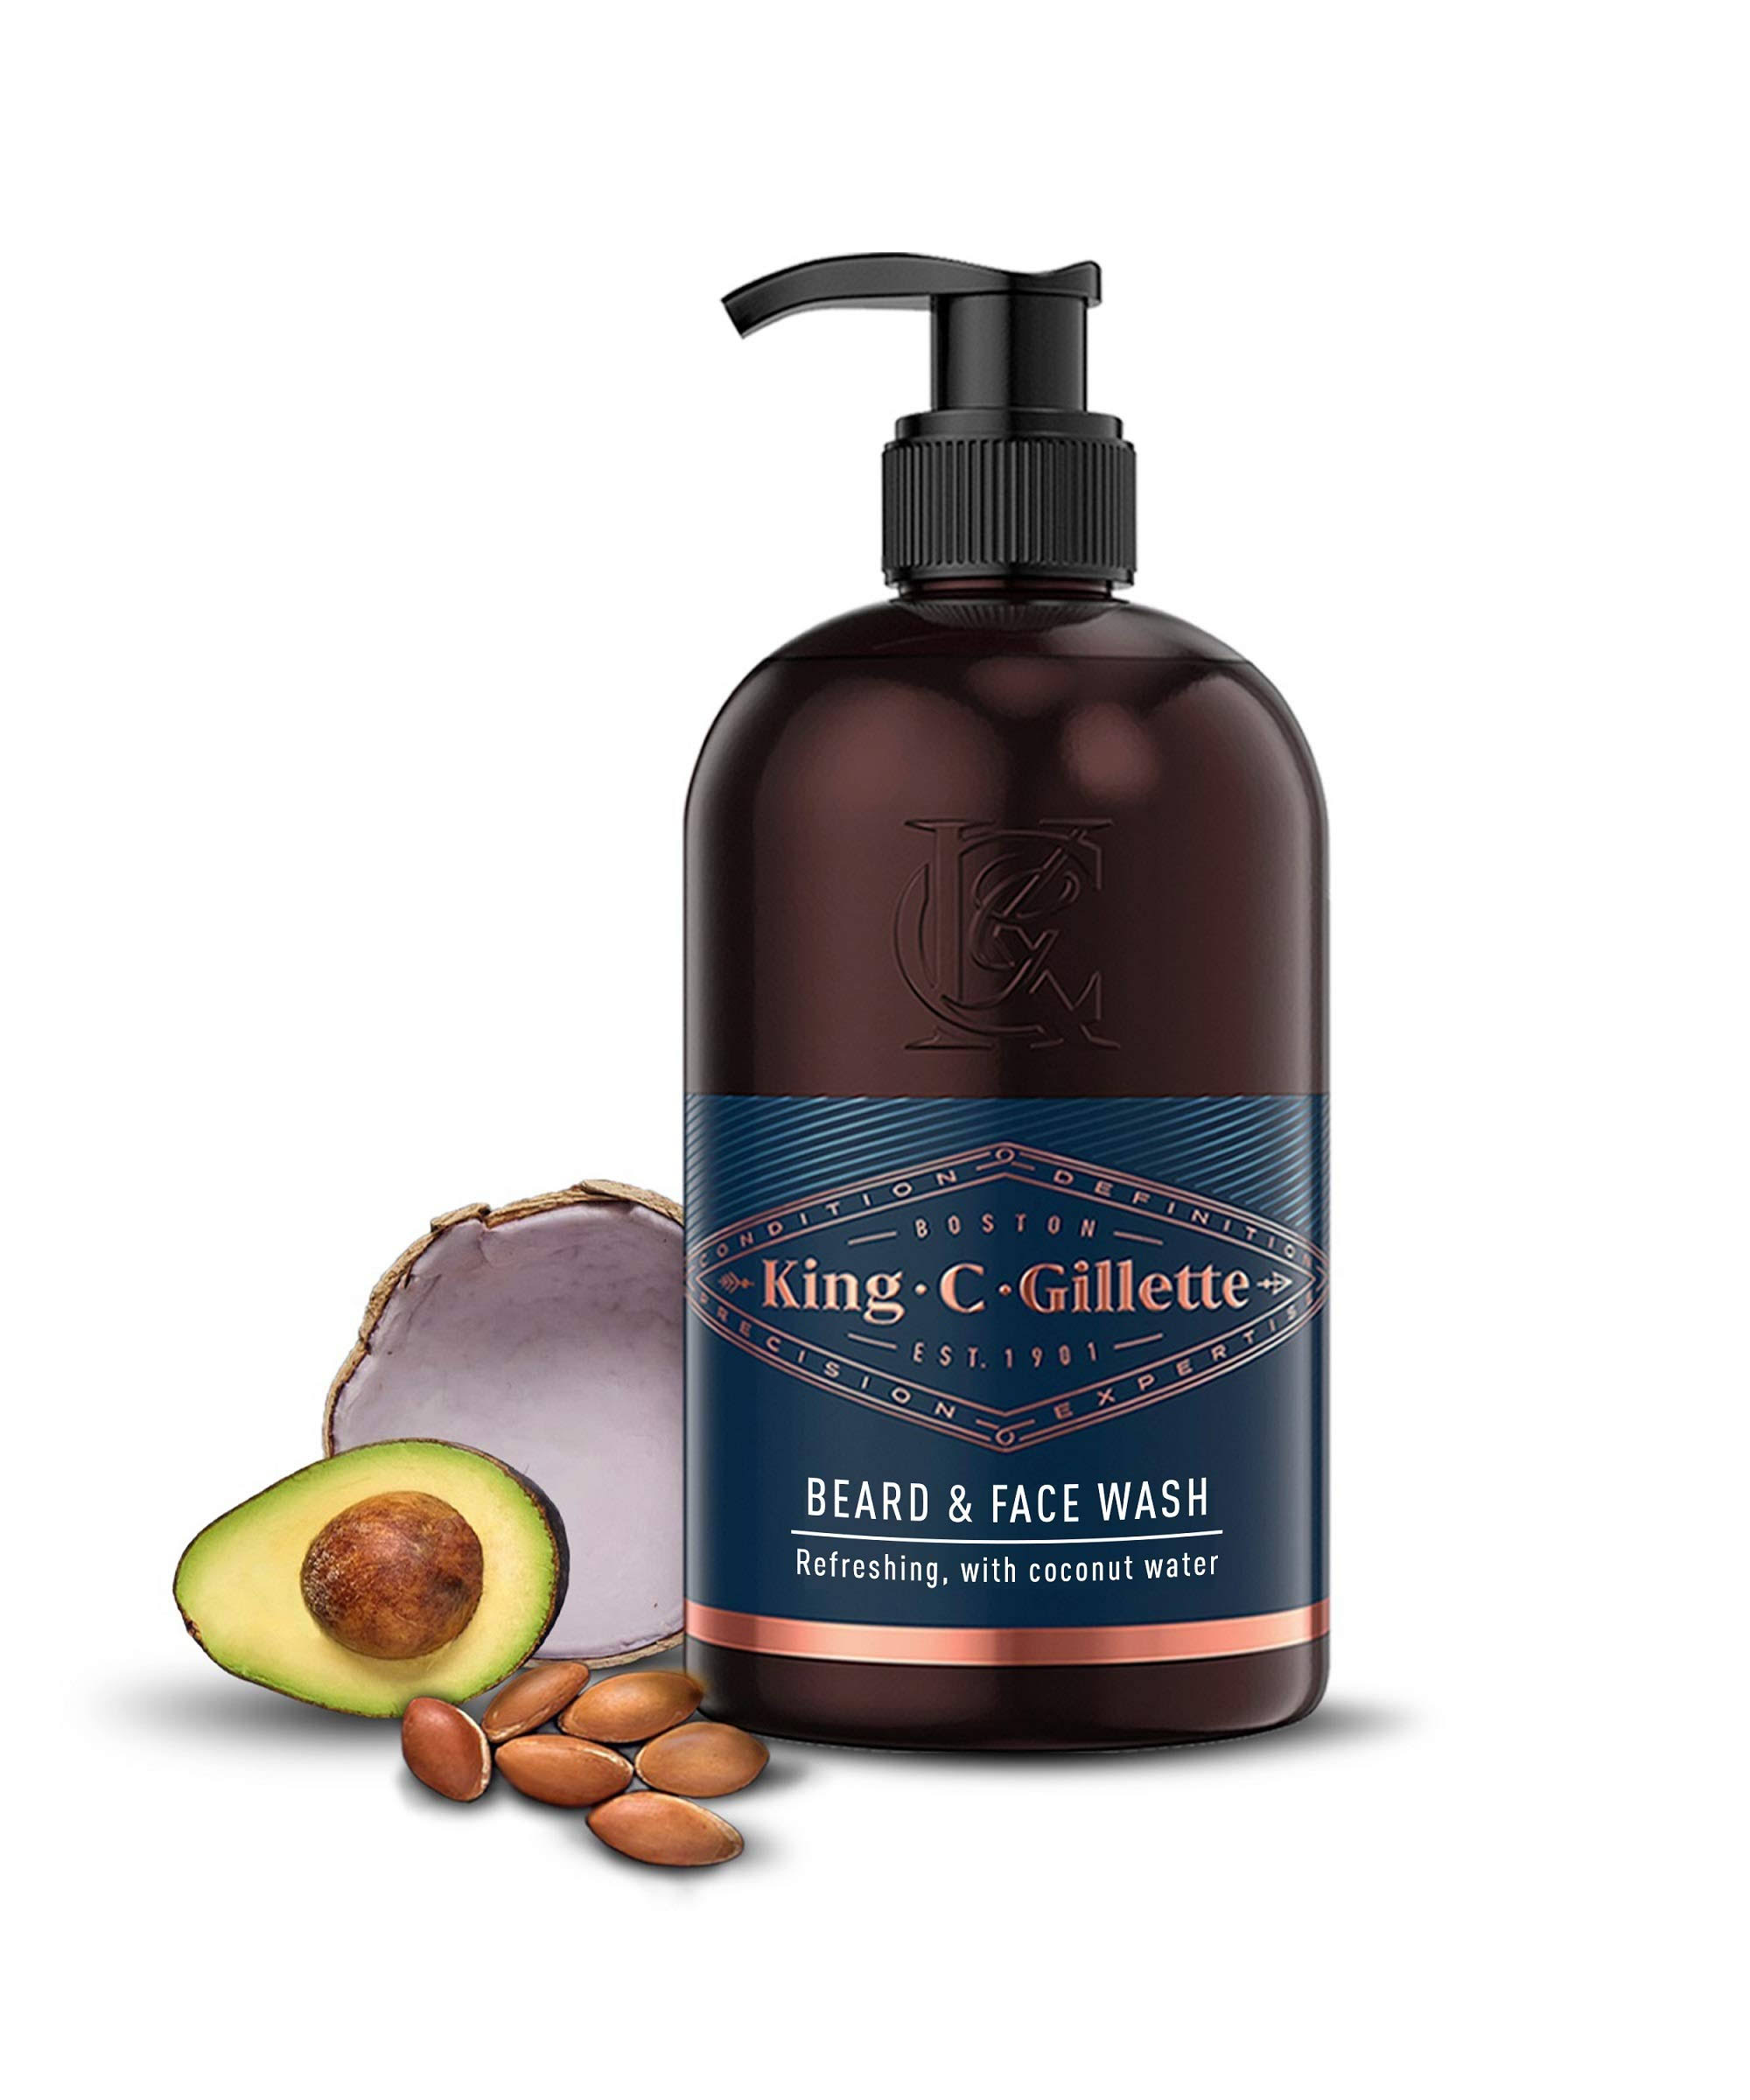 King C Gillette Beard and Face Wash with Coconut Water